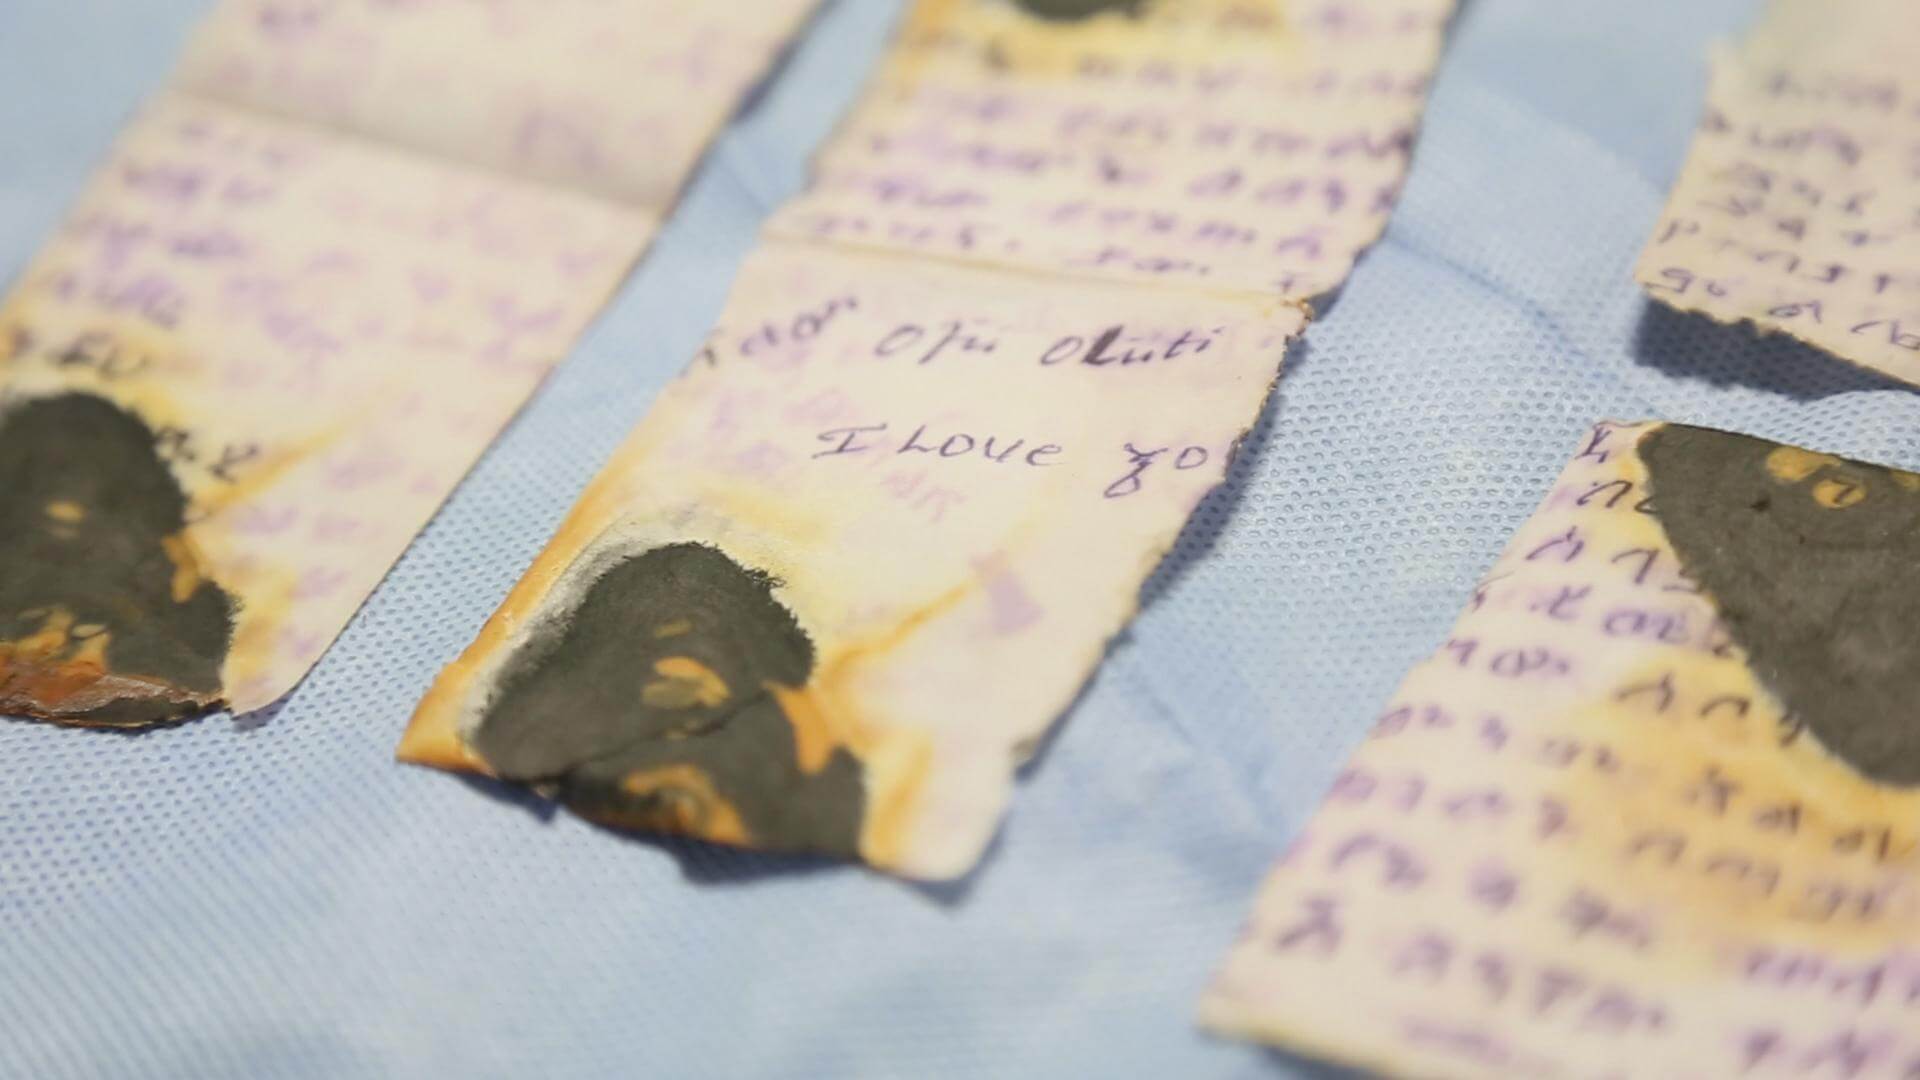 Still from Number 387. A close-up shot of a torn and burned handwritten note placed on blue fabric.